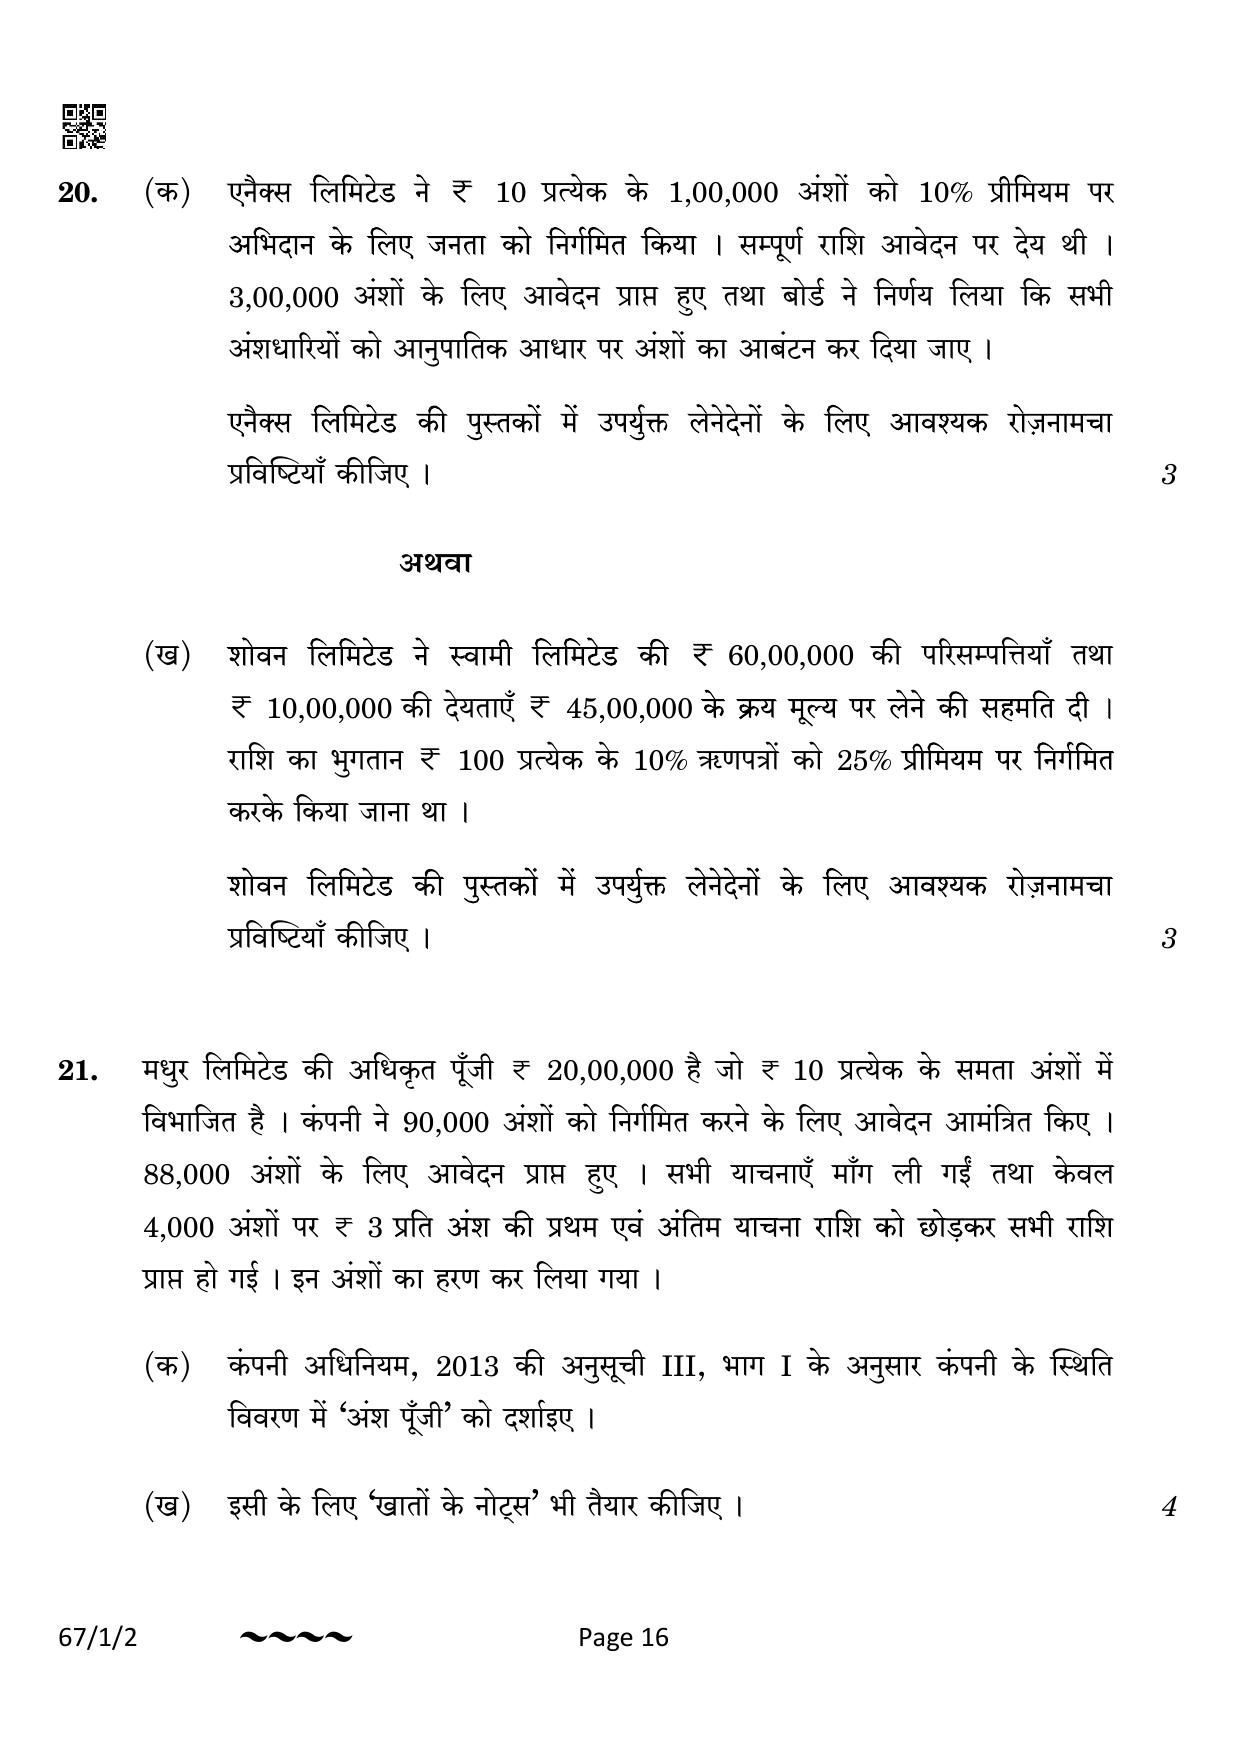 CBSE Class 12 67-1-2 Accountancy 2023 Question Paper - Page 16